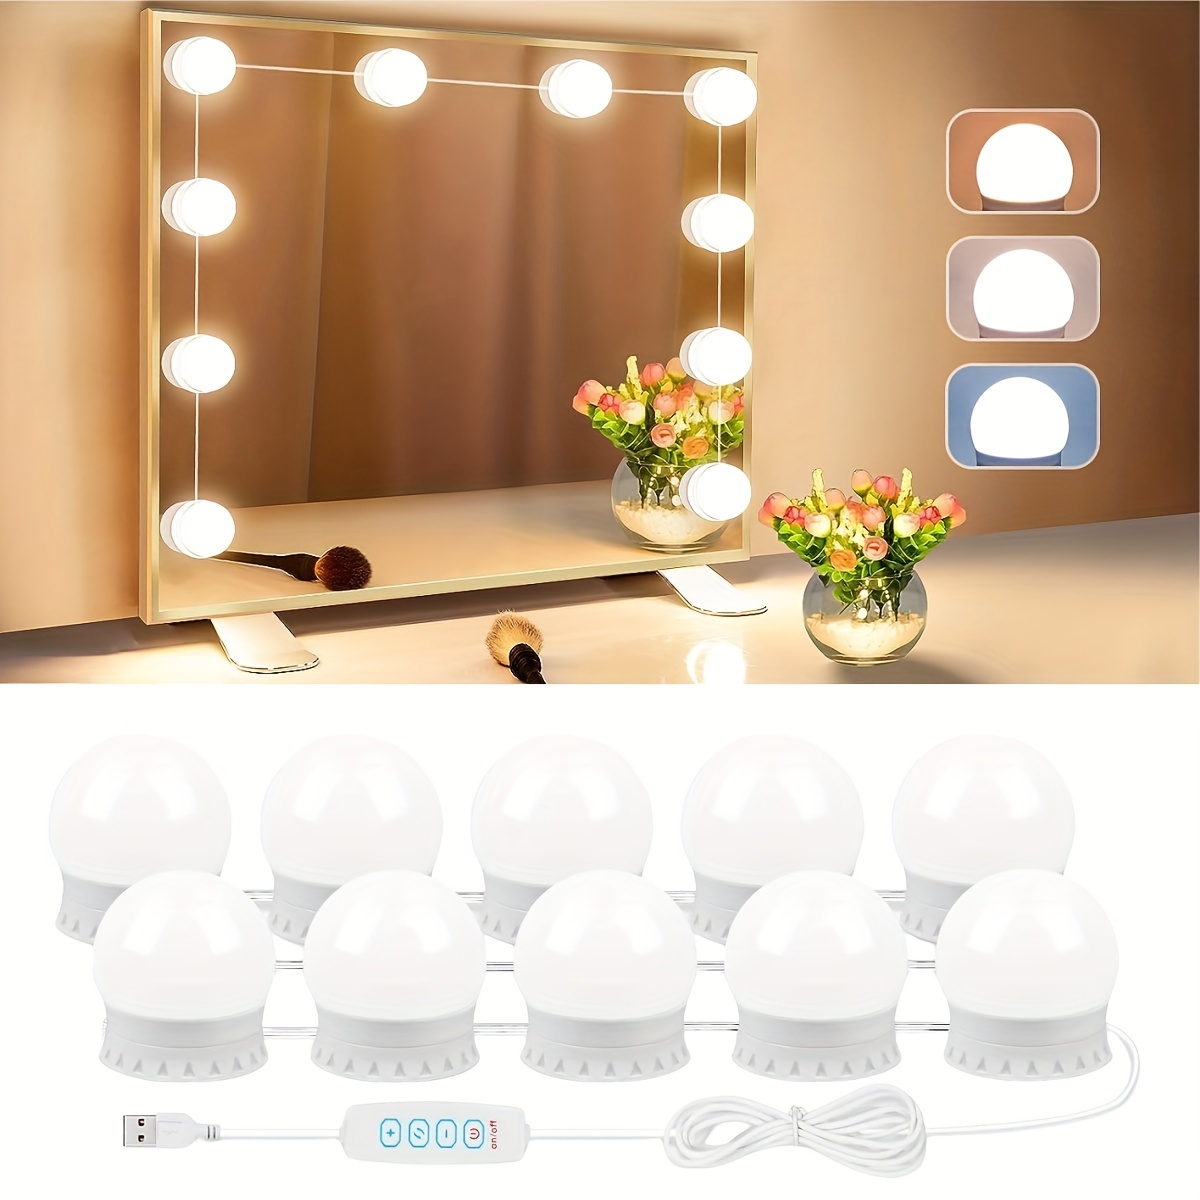 Vanity Mirror LED Light - Dimmable, 4 Lighting Colors, 5 Brightness Levels,  Stick-On Bulbs, USB Connection, Retractable Wire for Easy Installation.